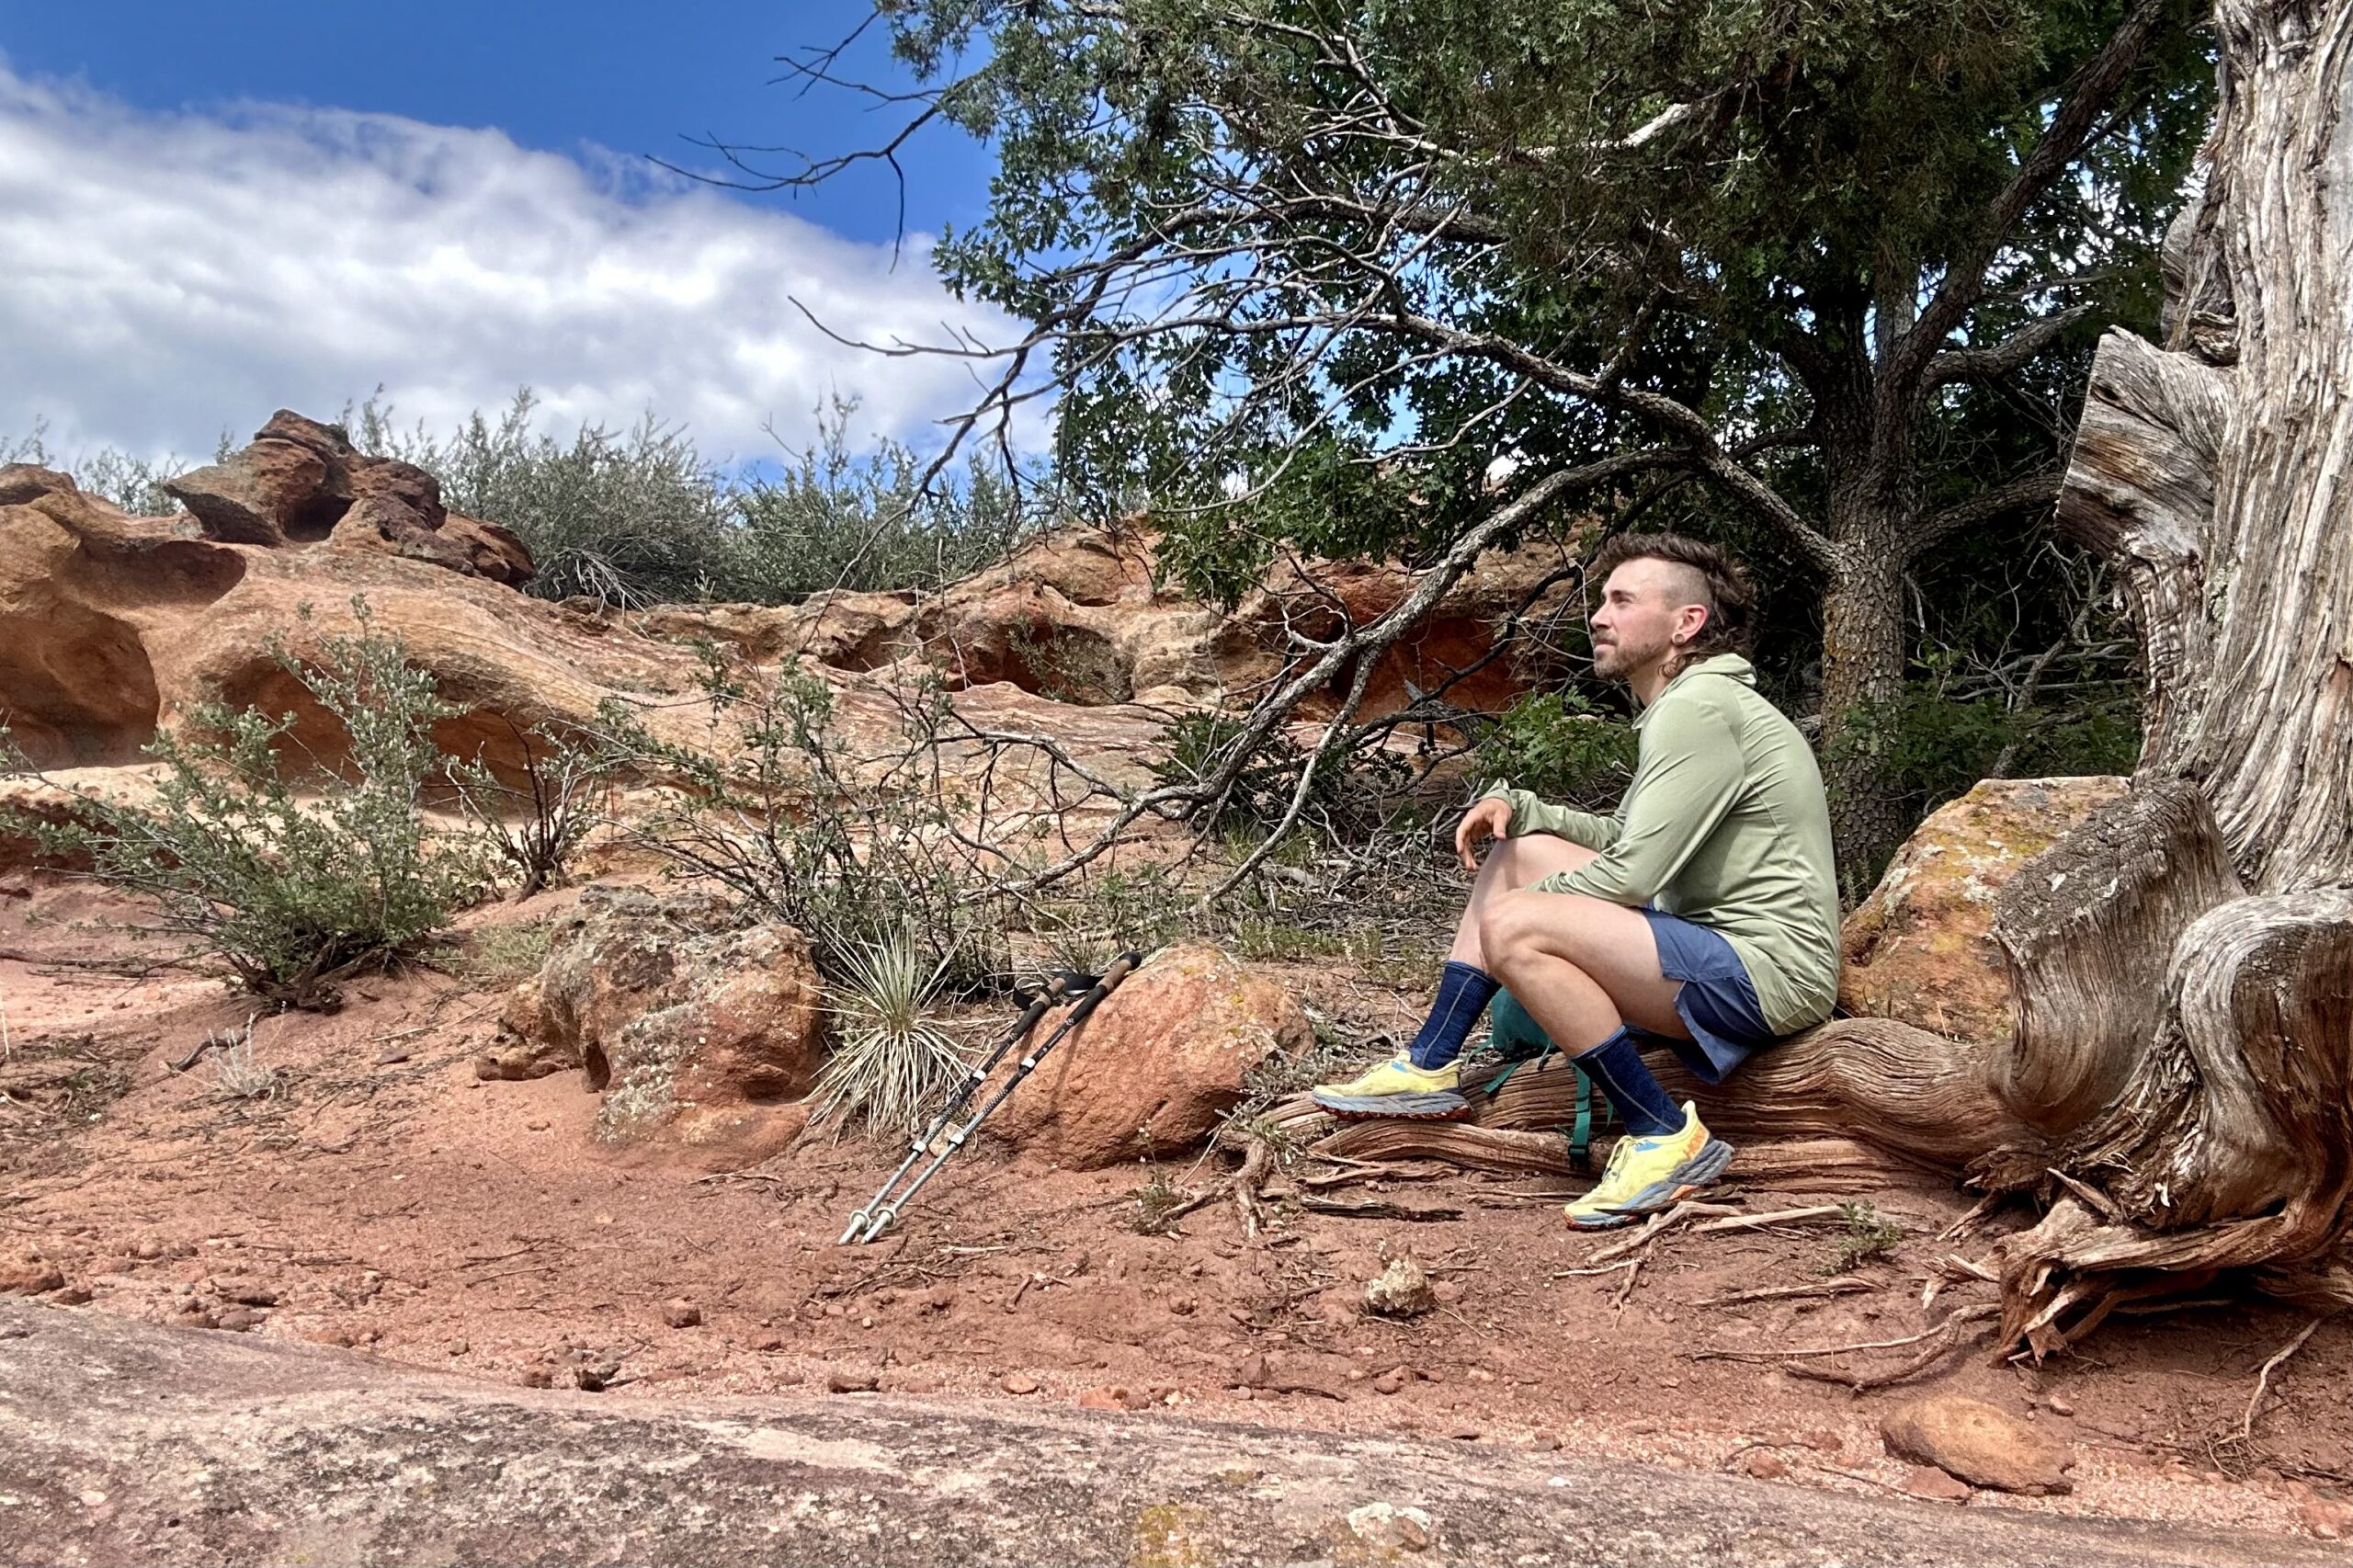 A hiker poses with a backpack, crouching on the ground and taking a break in a desert setting, looking off into the distance.